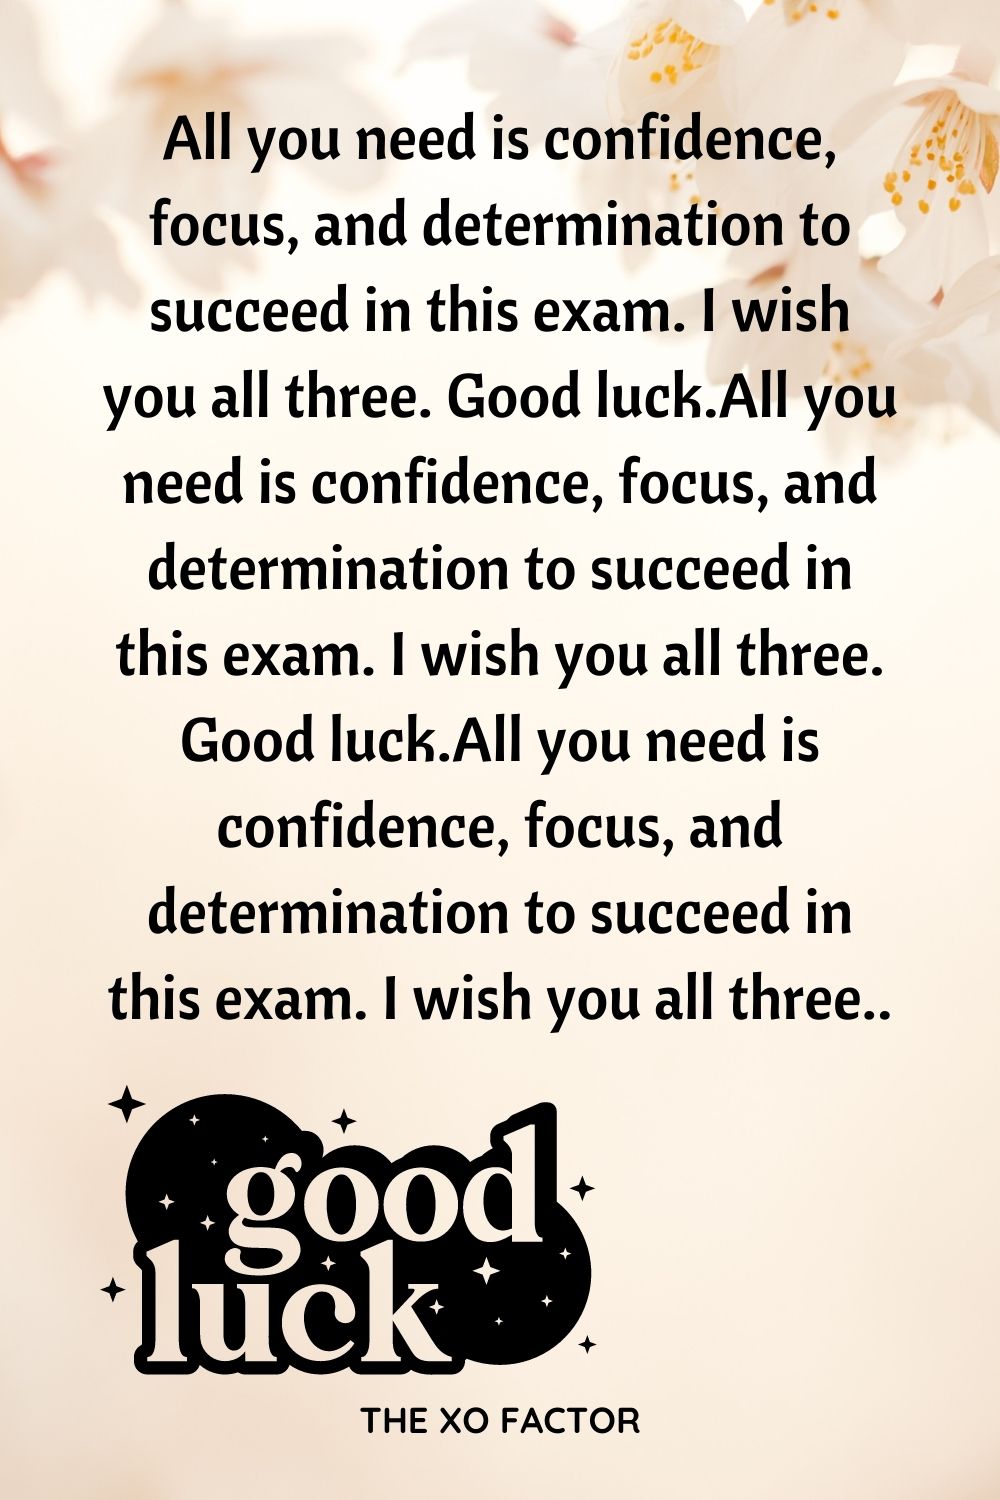 All you need is confidence, focus, and determination to succeed in this exam. I wish you all three. Good luck.